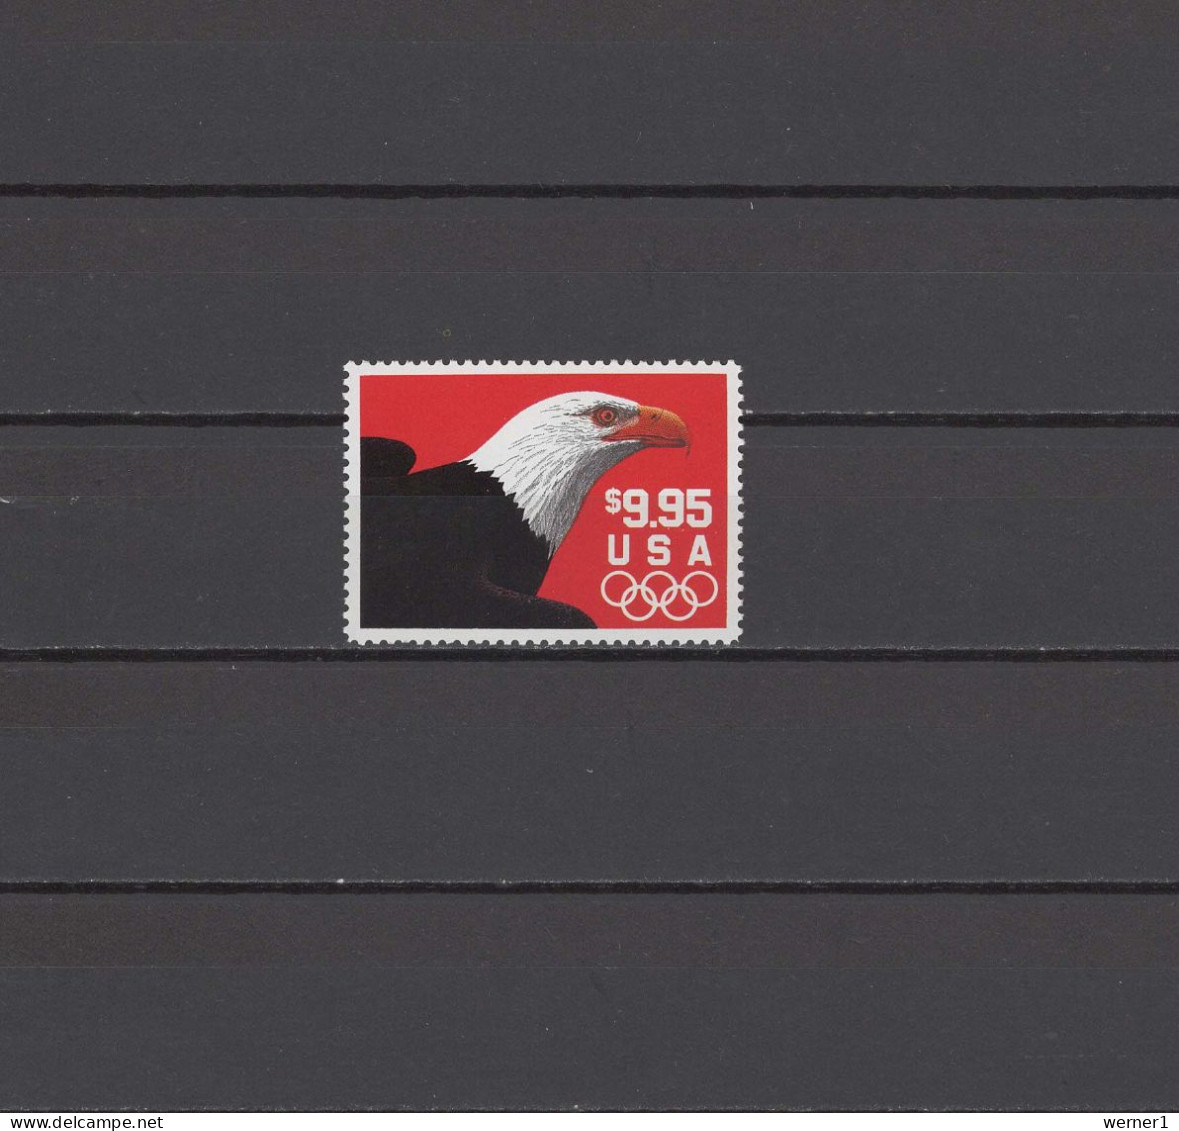 USA 1991 Olympic Games, Eagle 9.95$ Stamp MNH - Ete 1992: Barcelone